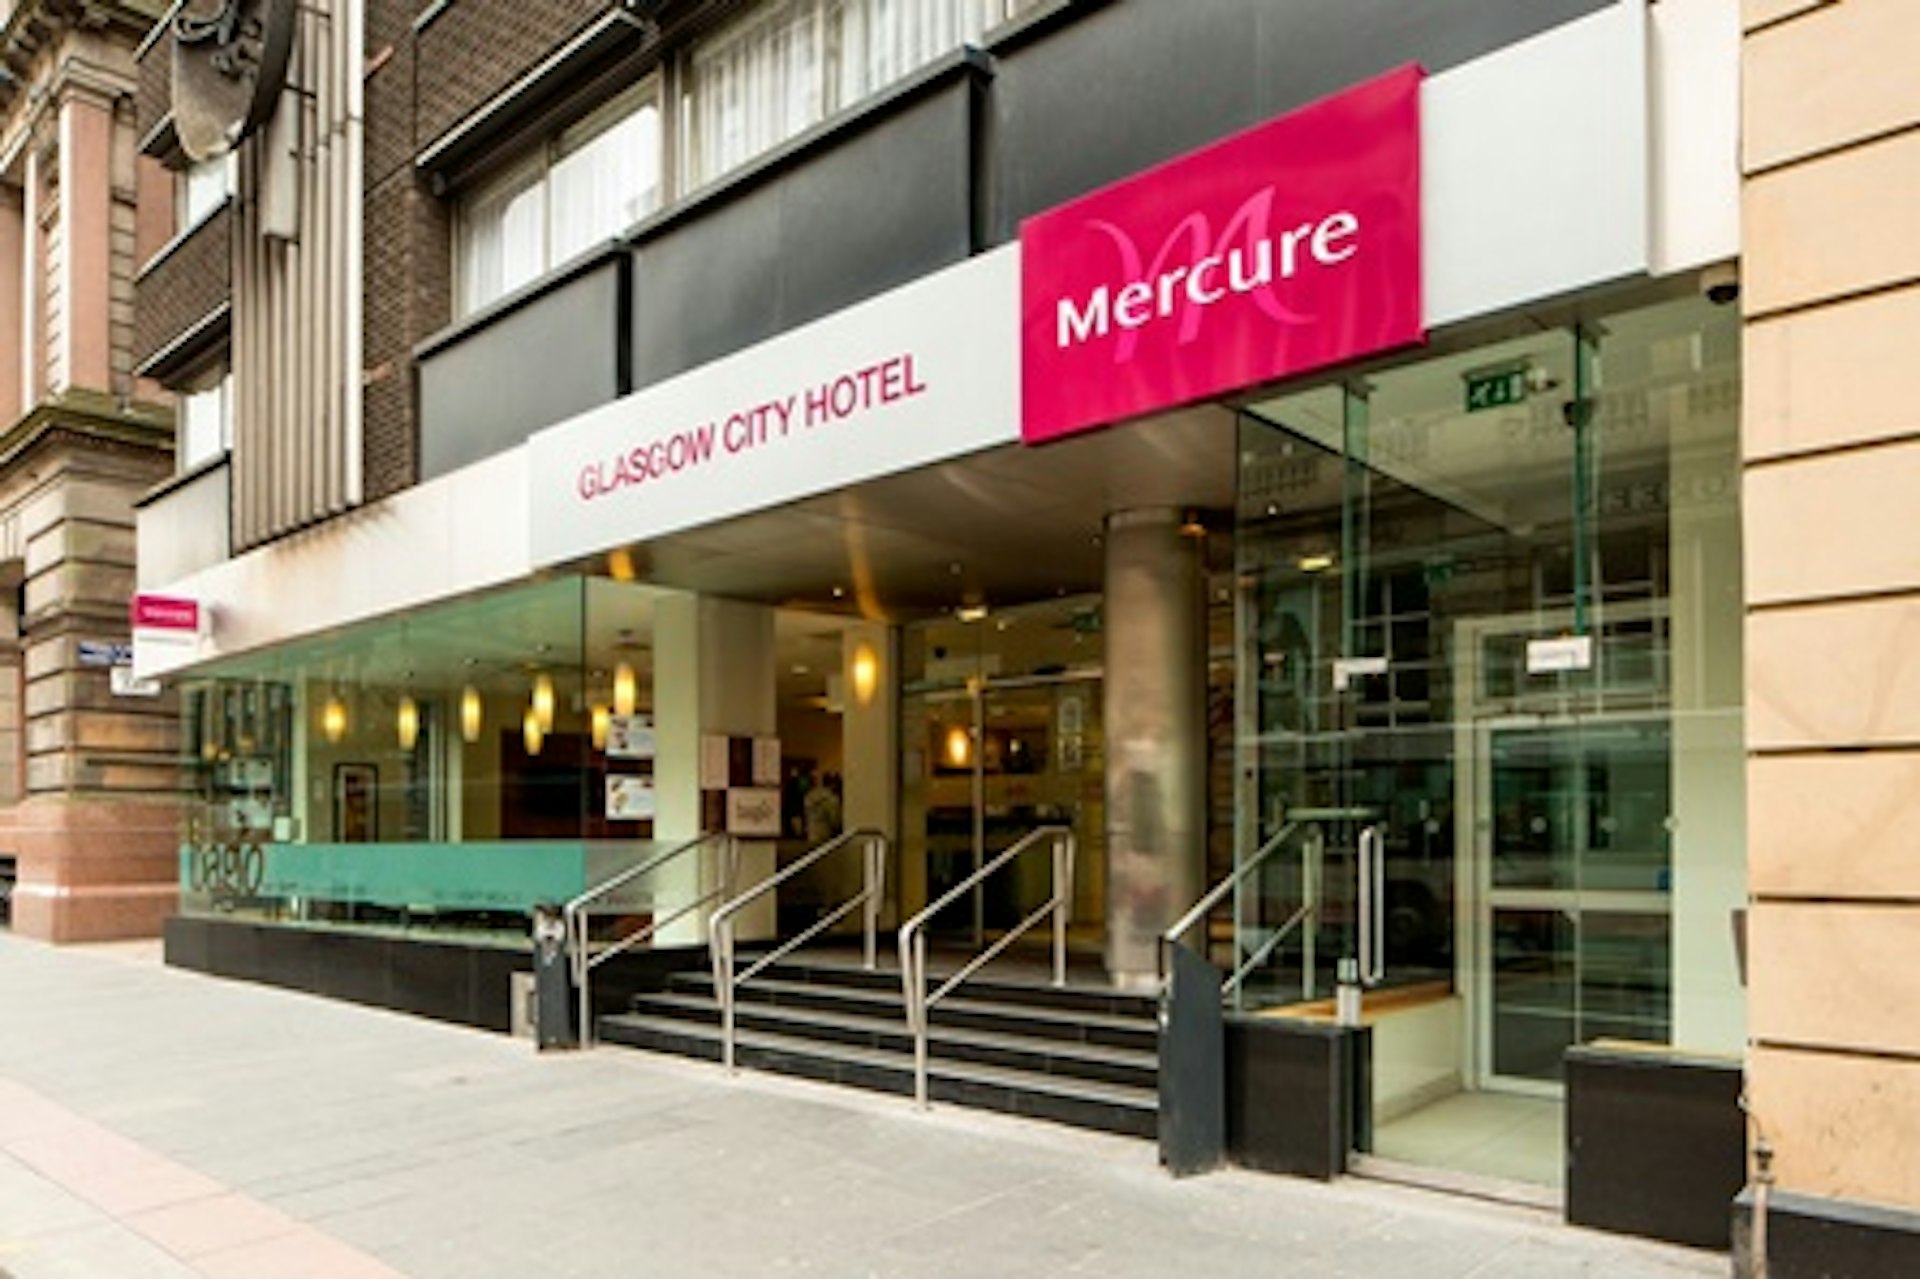 One Night Break for Two at the Glasgow City Hotel 2